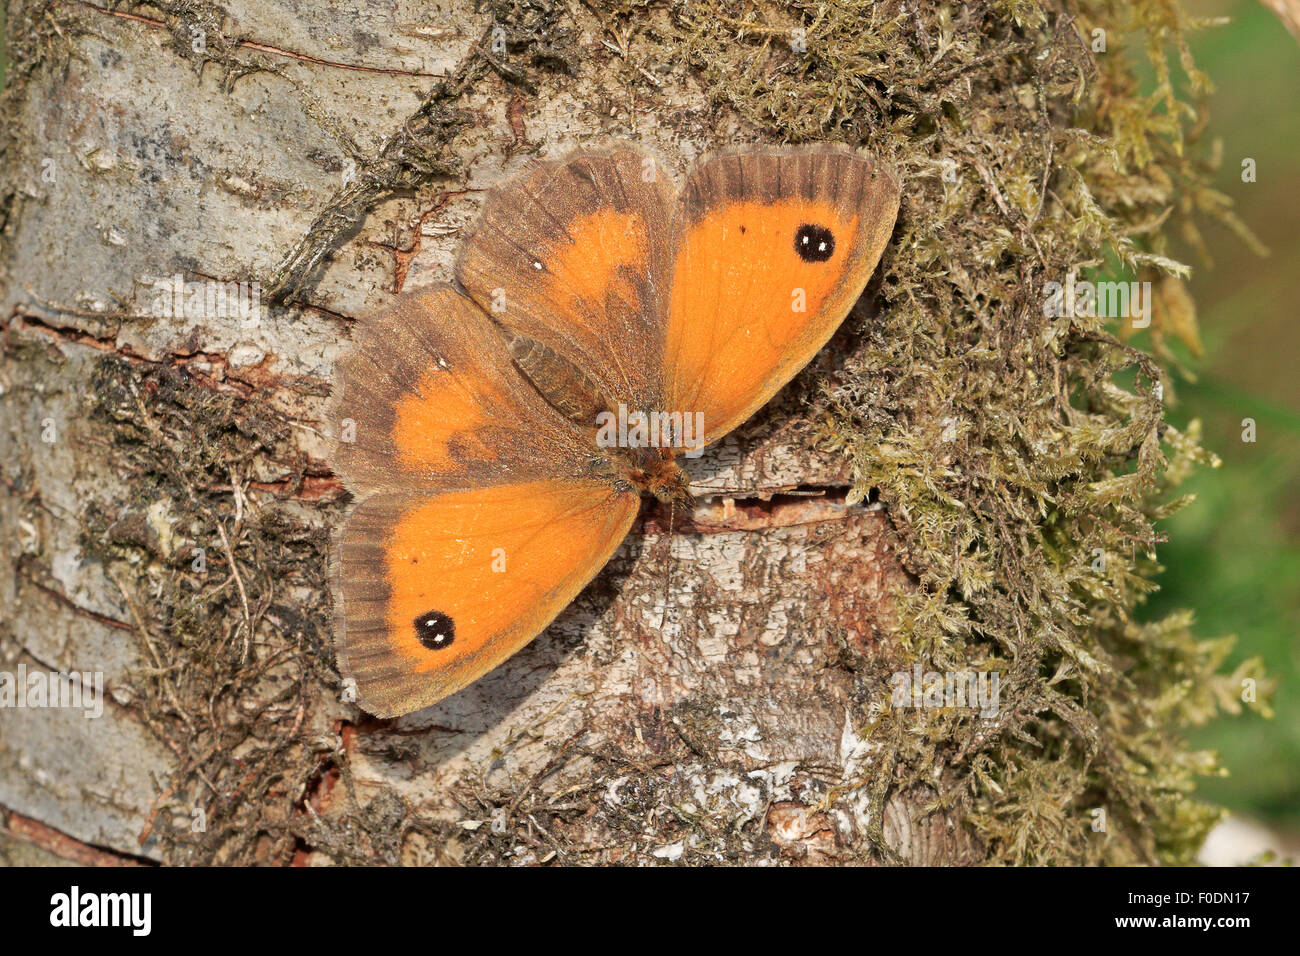 Female Hedge Brown or Gatekeeper Butterfly basking on a tree stump Stock Photo